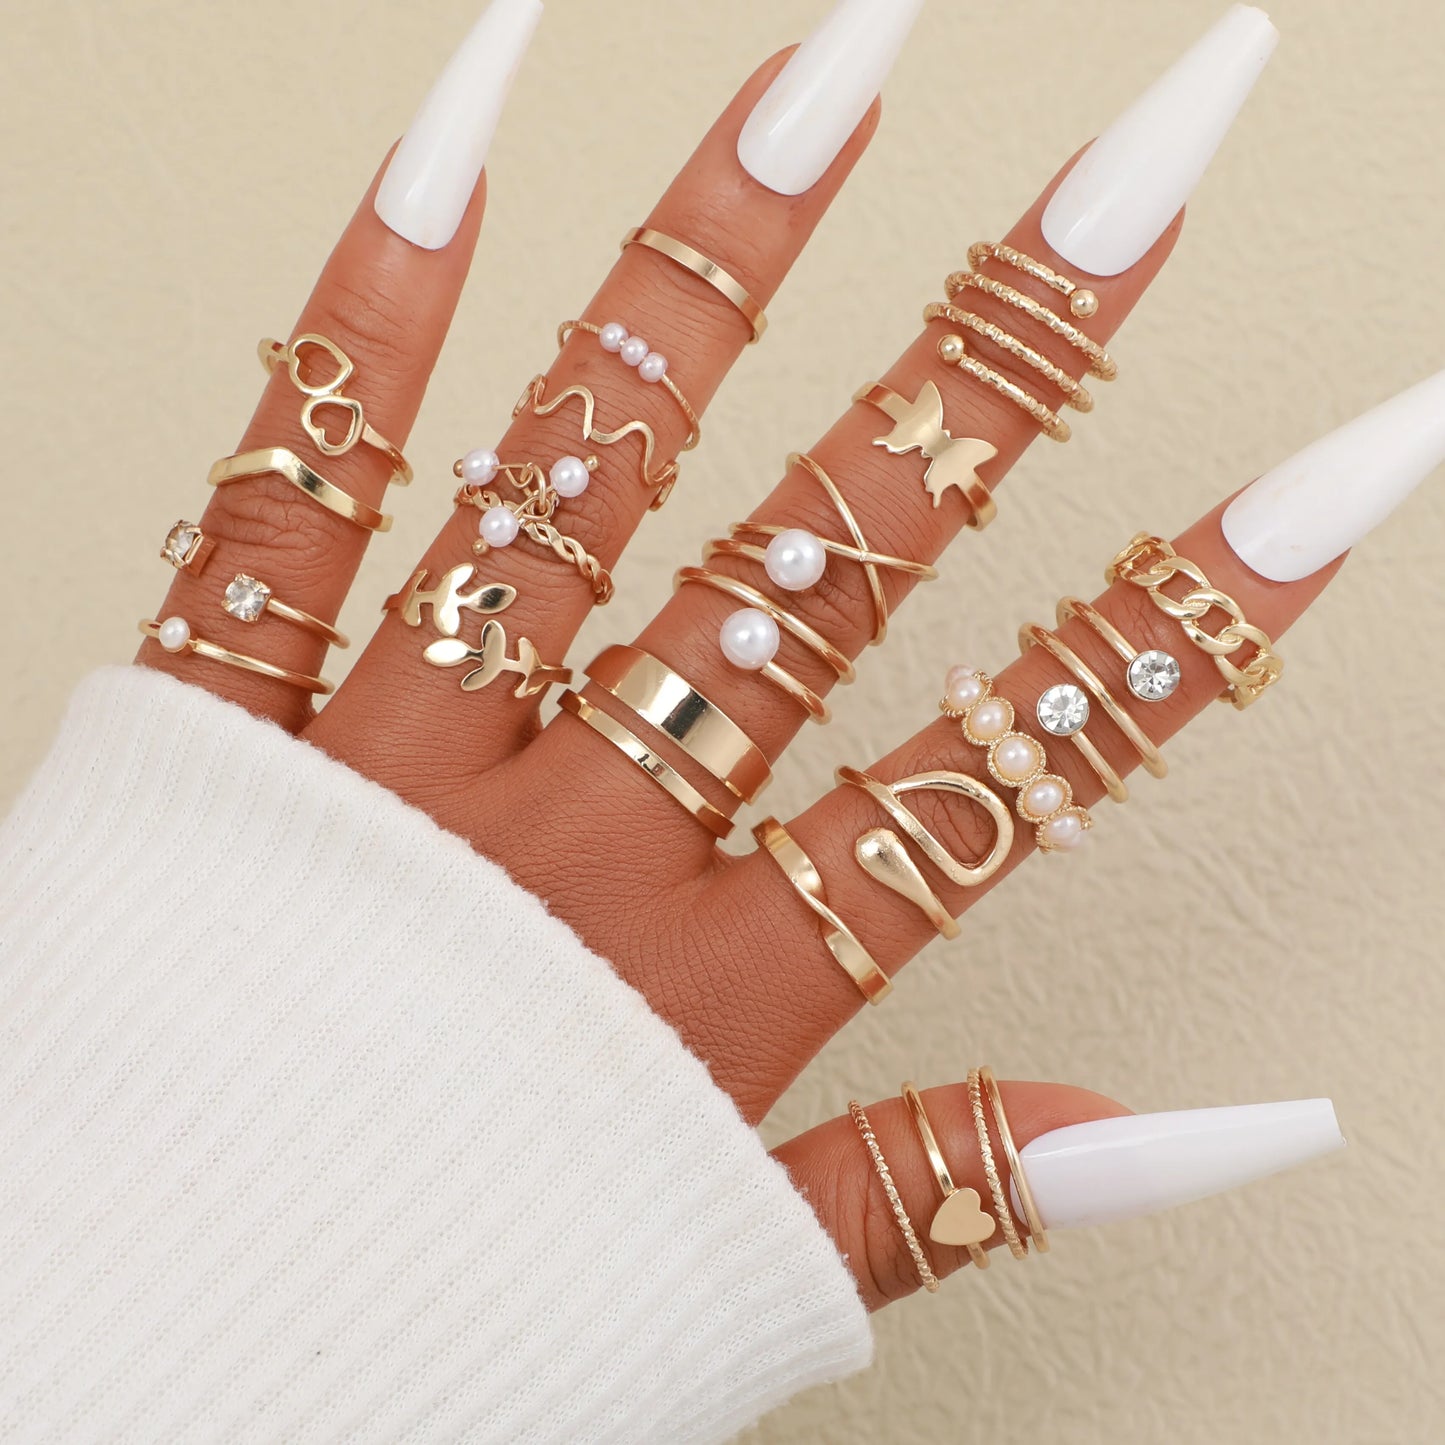 22 Sets Of Creative Ring Gold-color